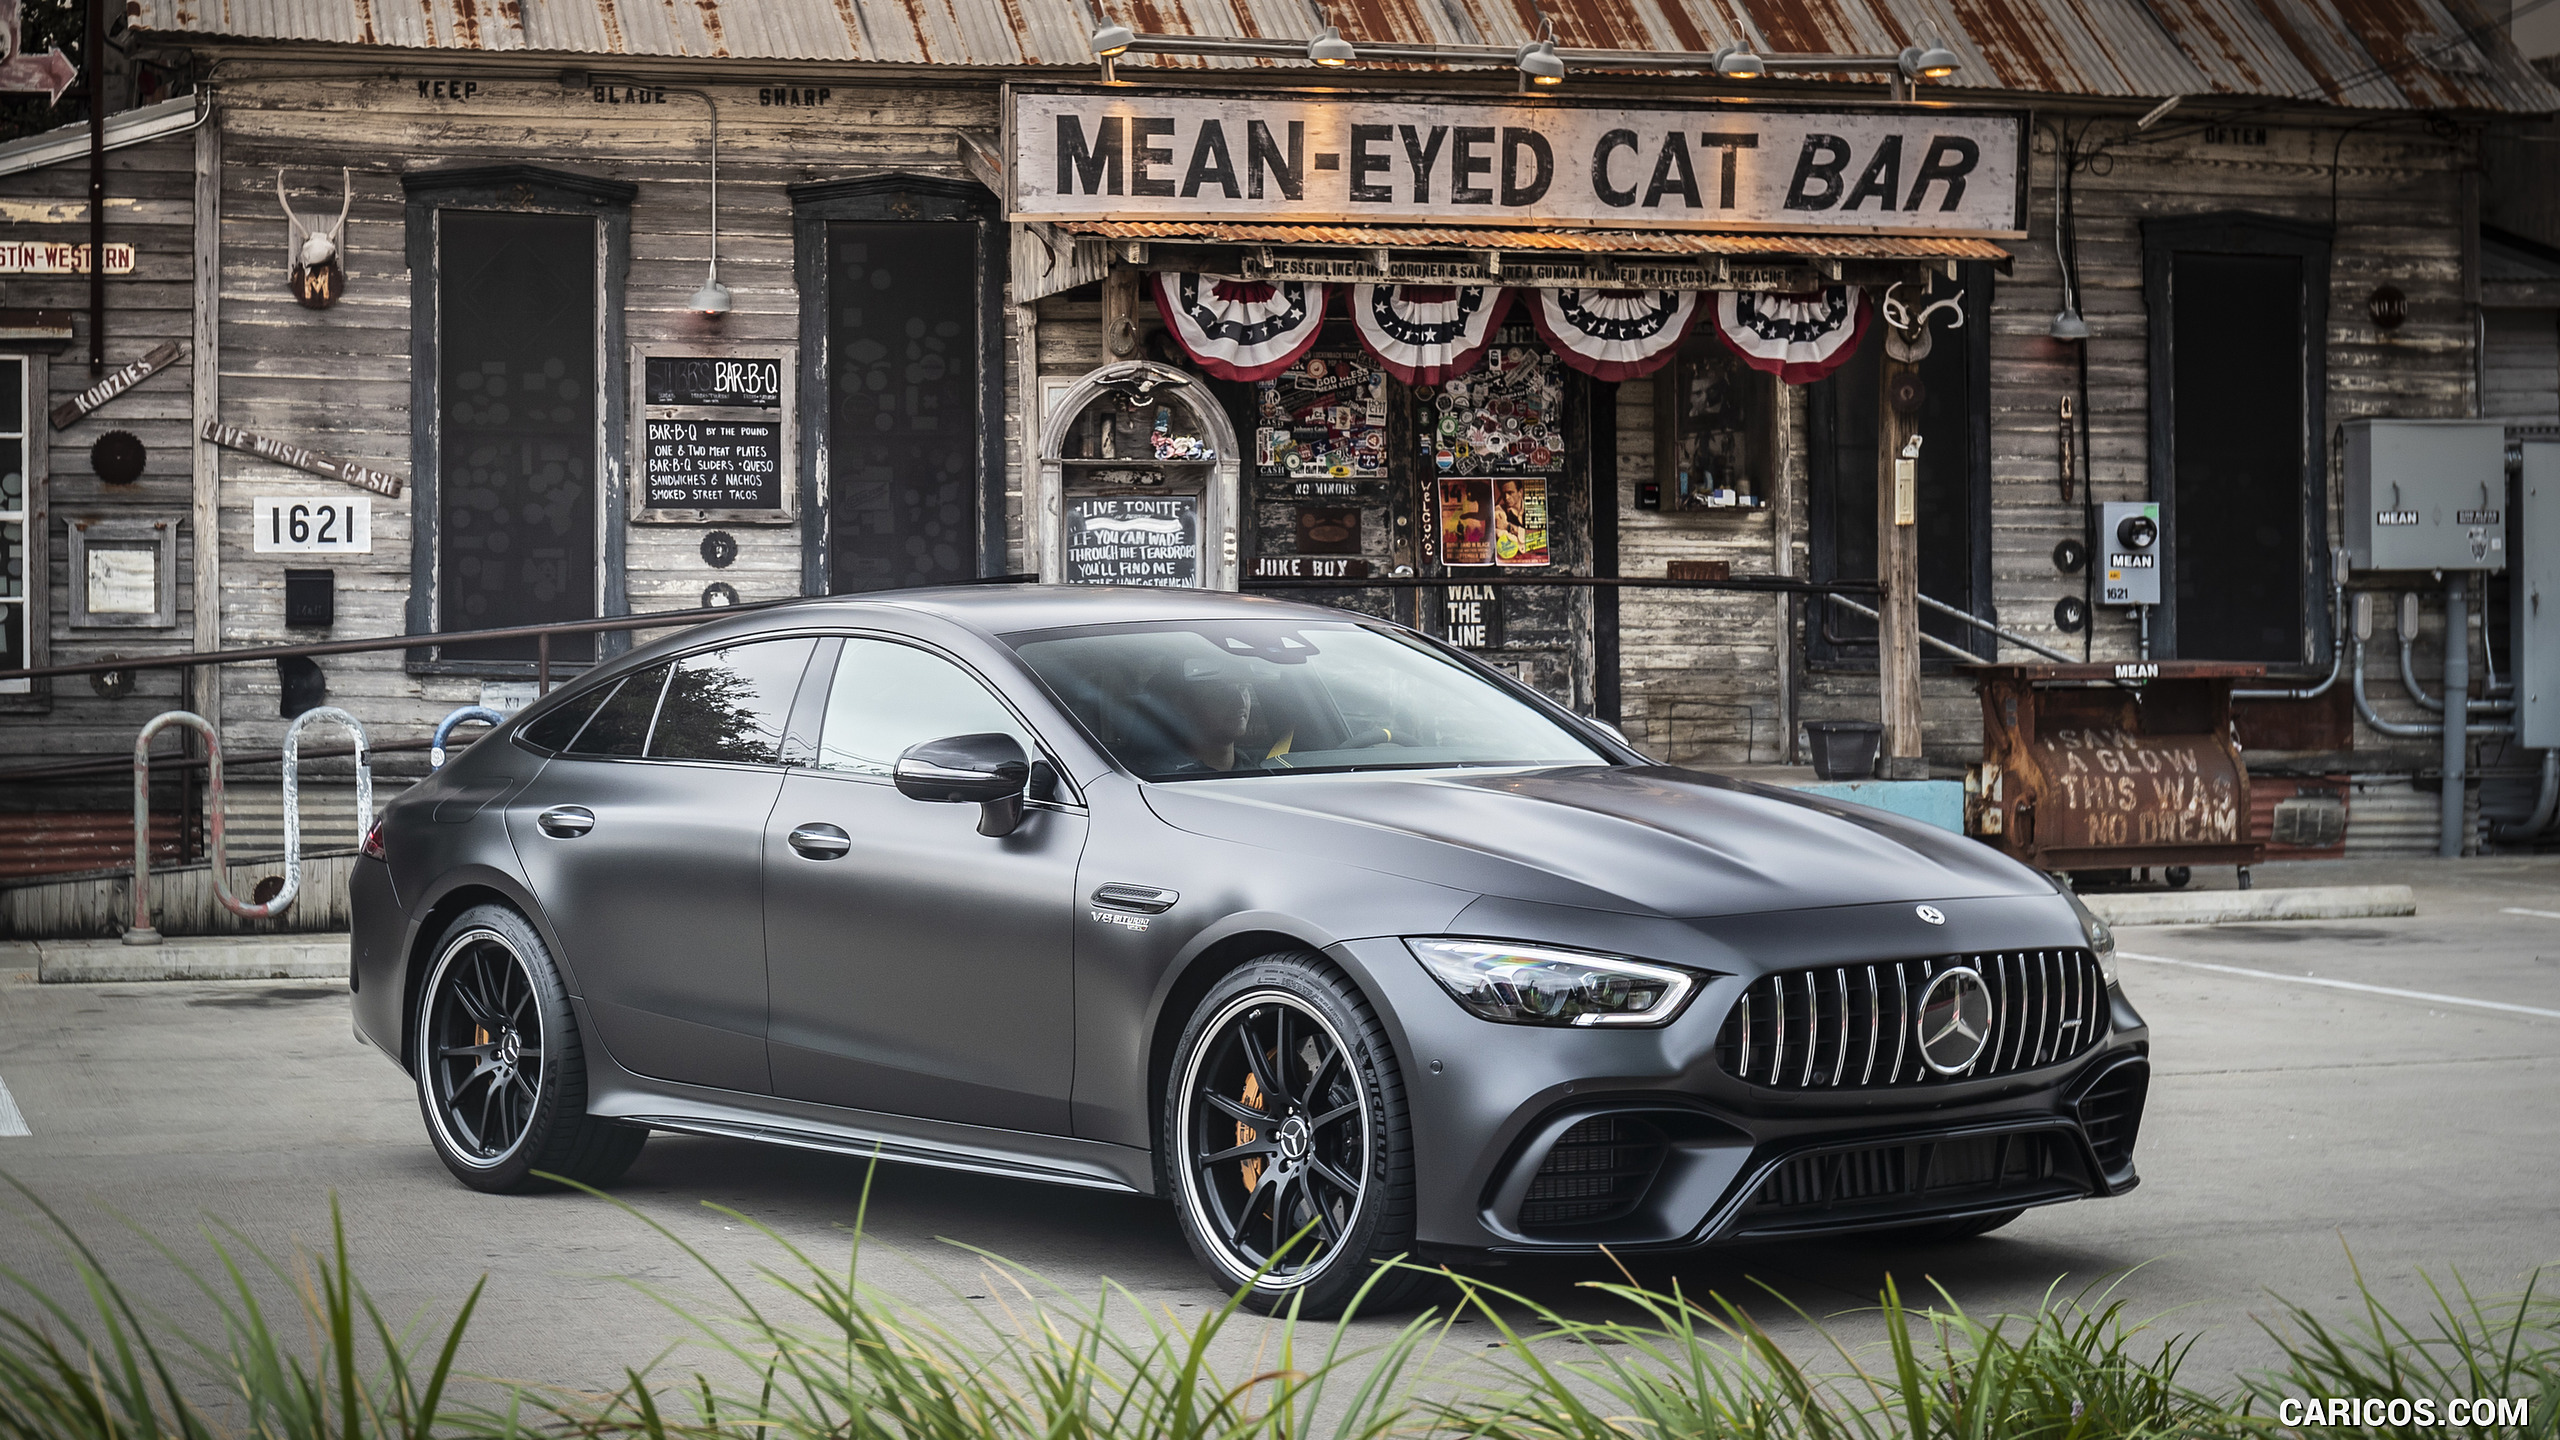 2019 Mercedes-AMG GT 63 S 4MATIC+ 4-Door Coupe - Front Three-Quarter, #218 of 427